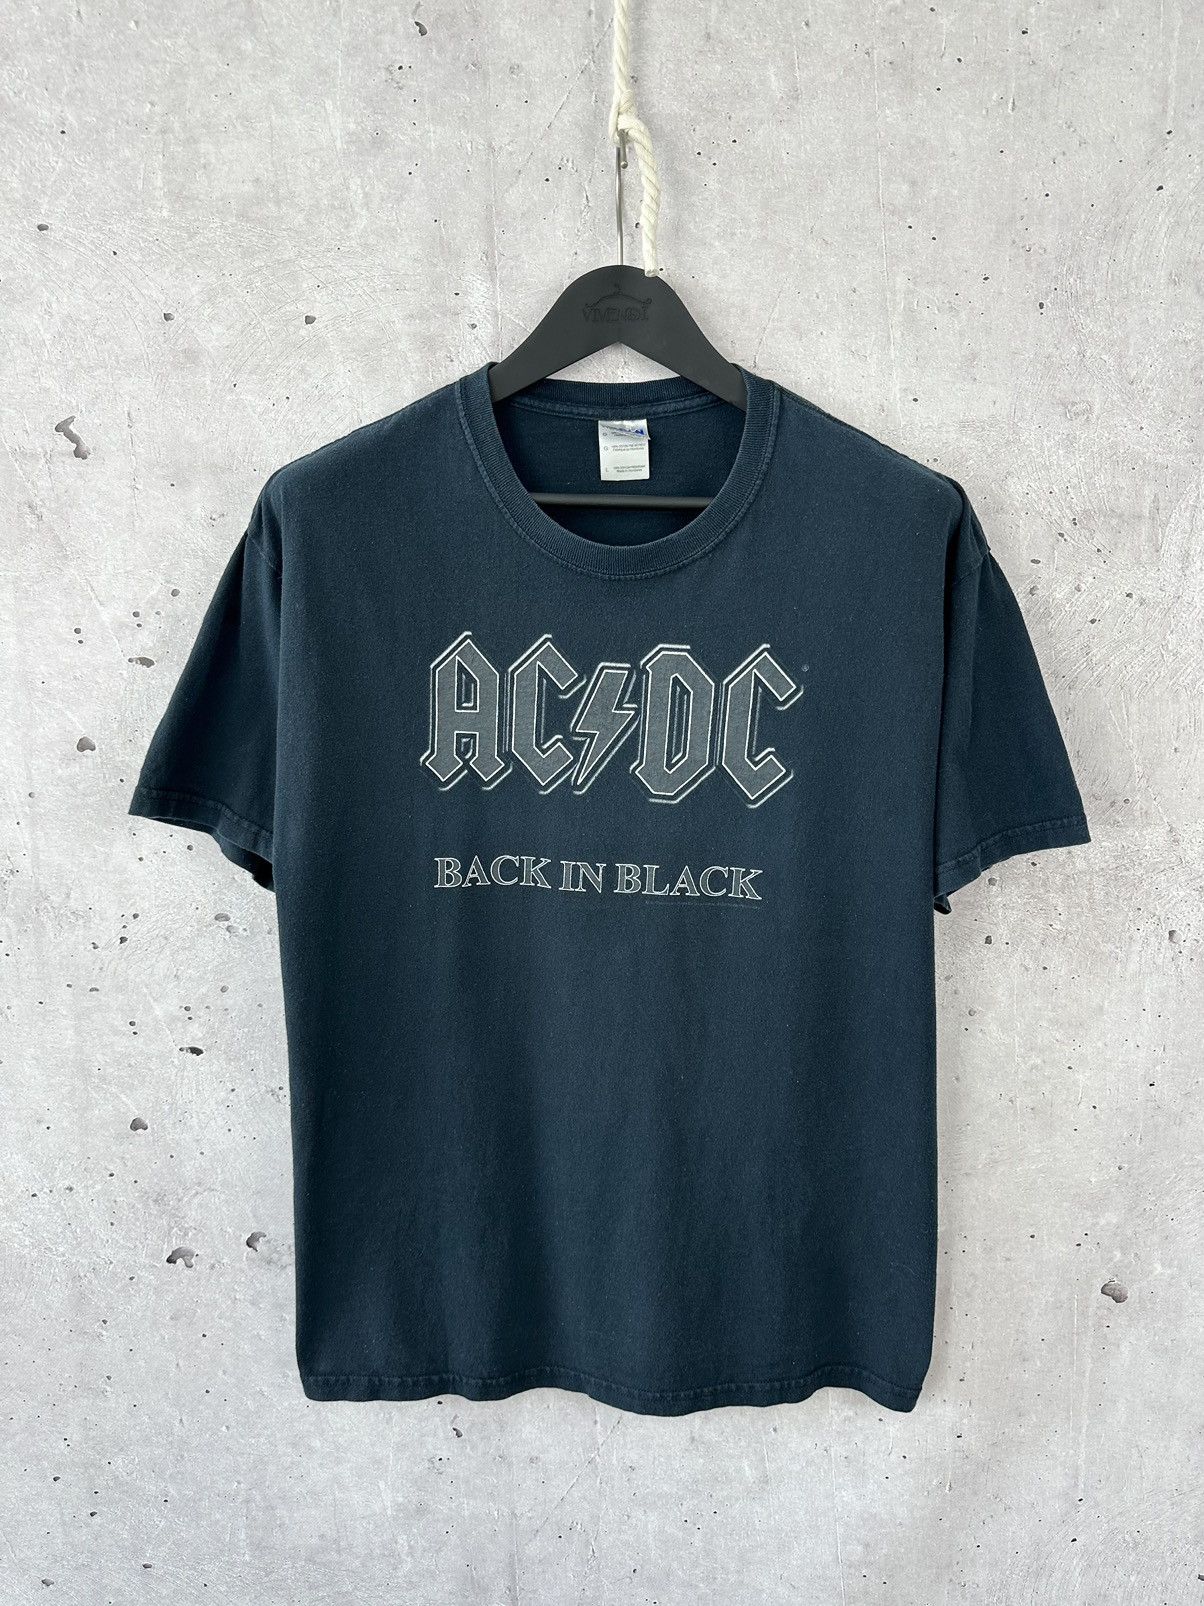 Pre-owned Acdc X Band Tees Ac/dc Vintage Back In Black